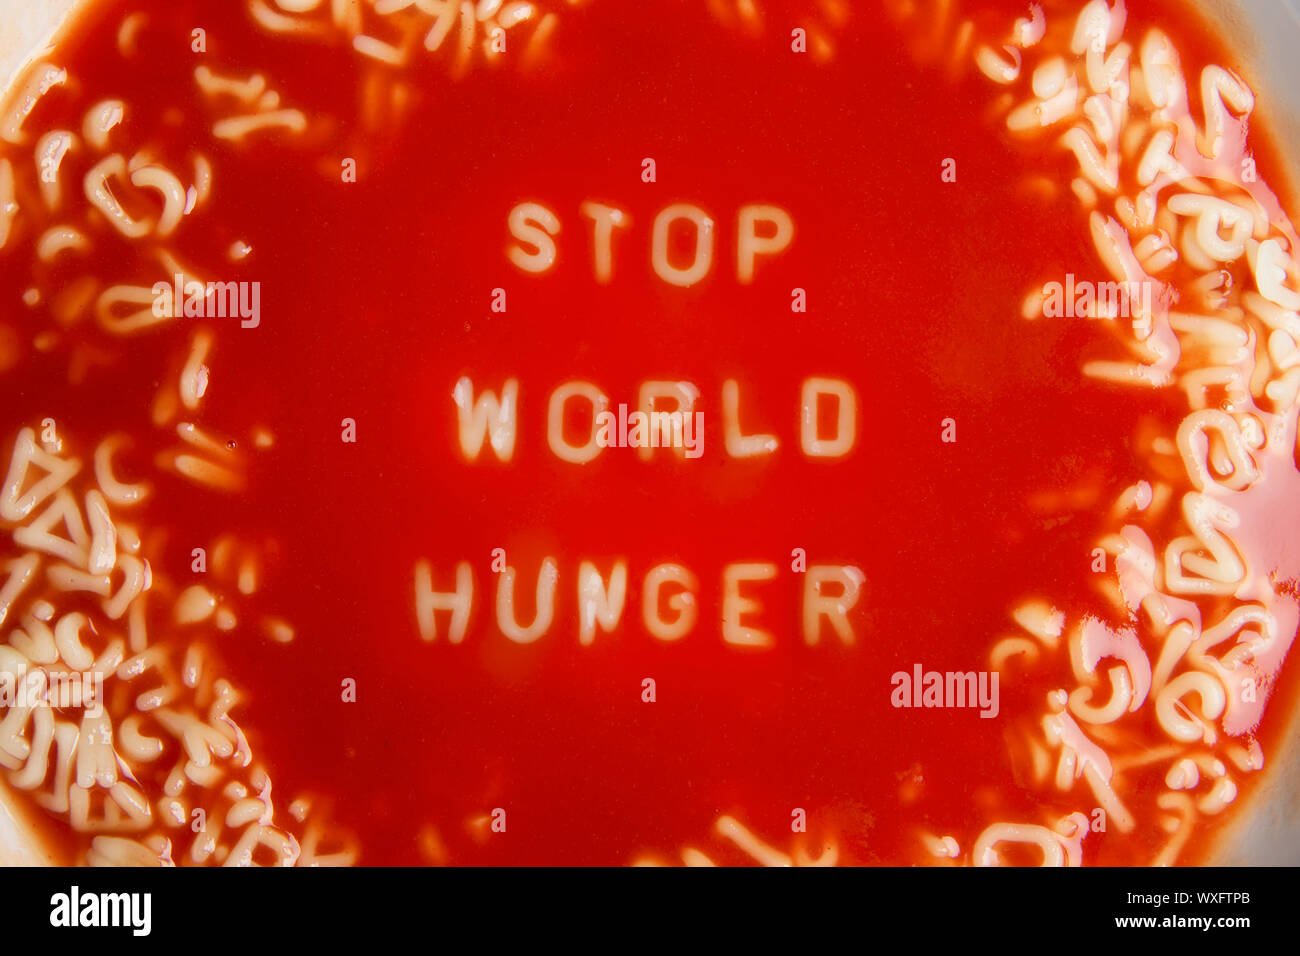 how to help stop world hunger